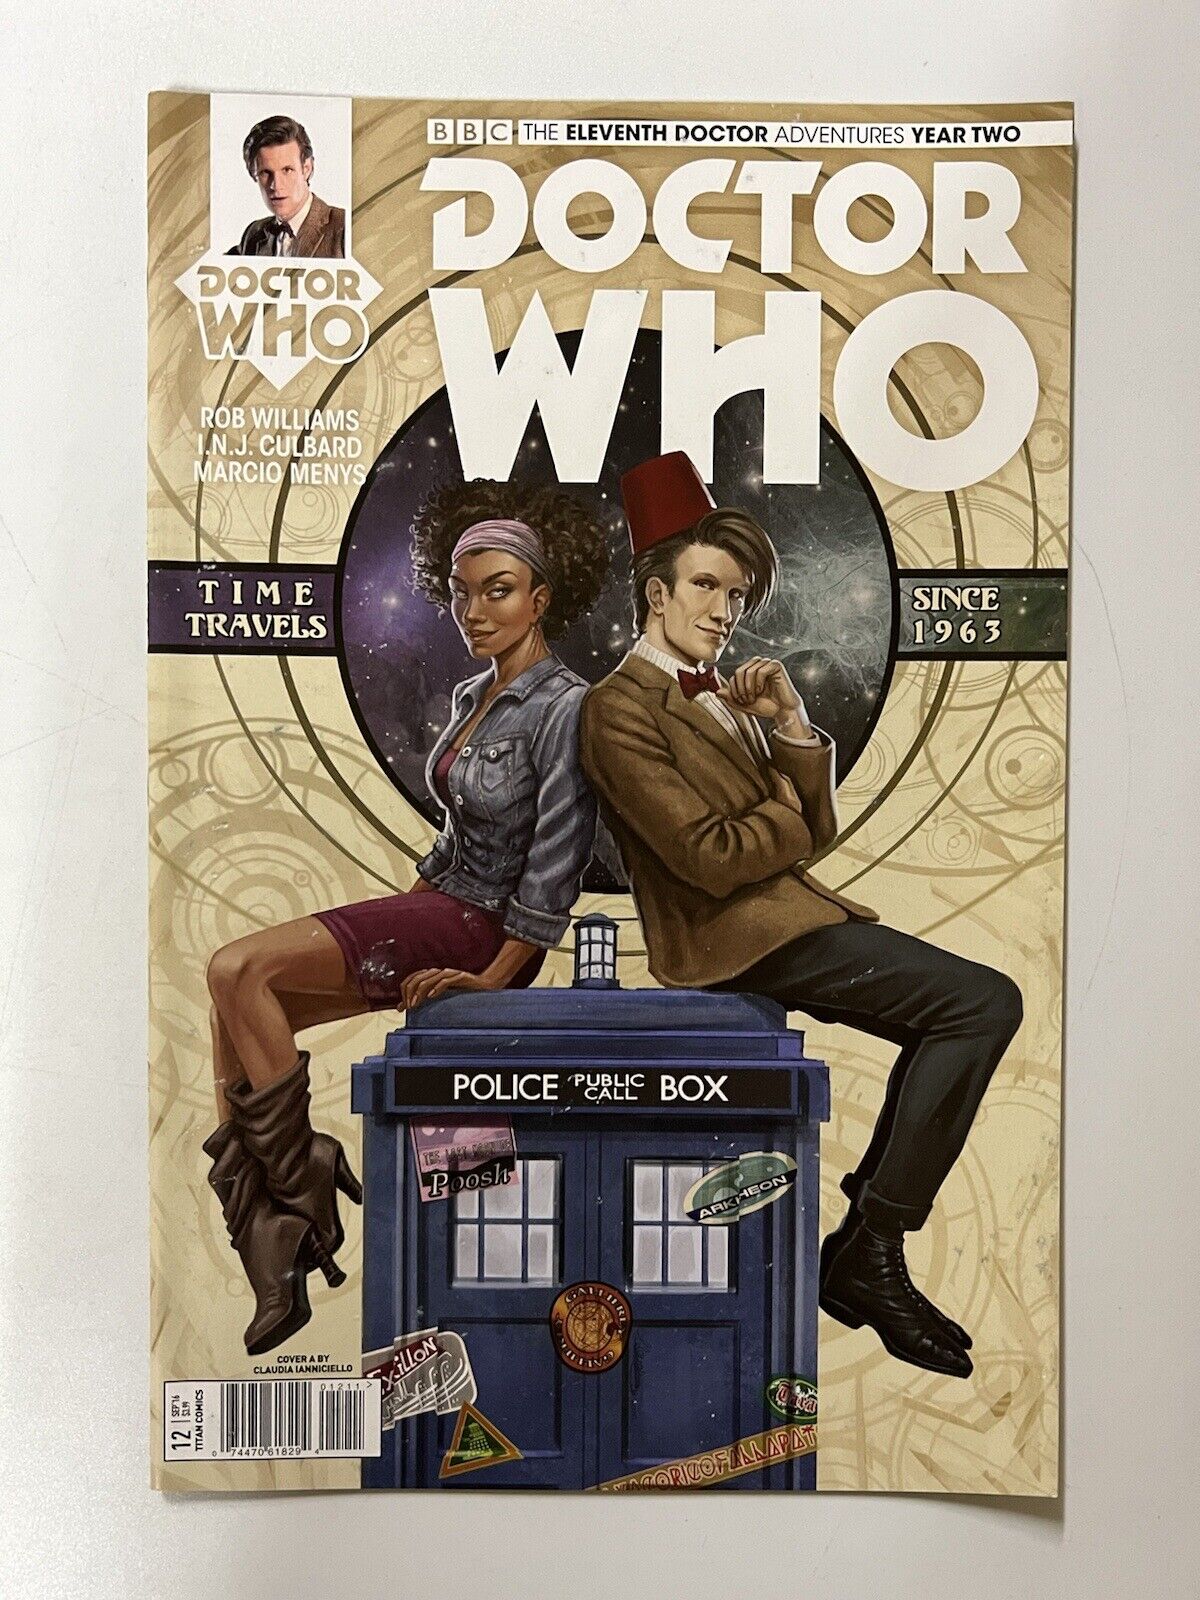 Doctor Who The Eleventh 11th Doctor Adventures Year Two #12 comic book TV show |